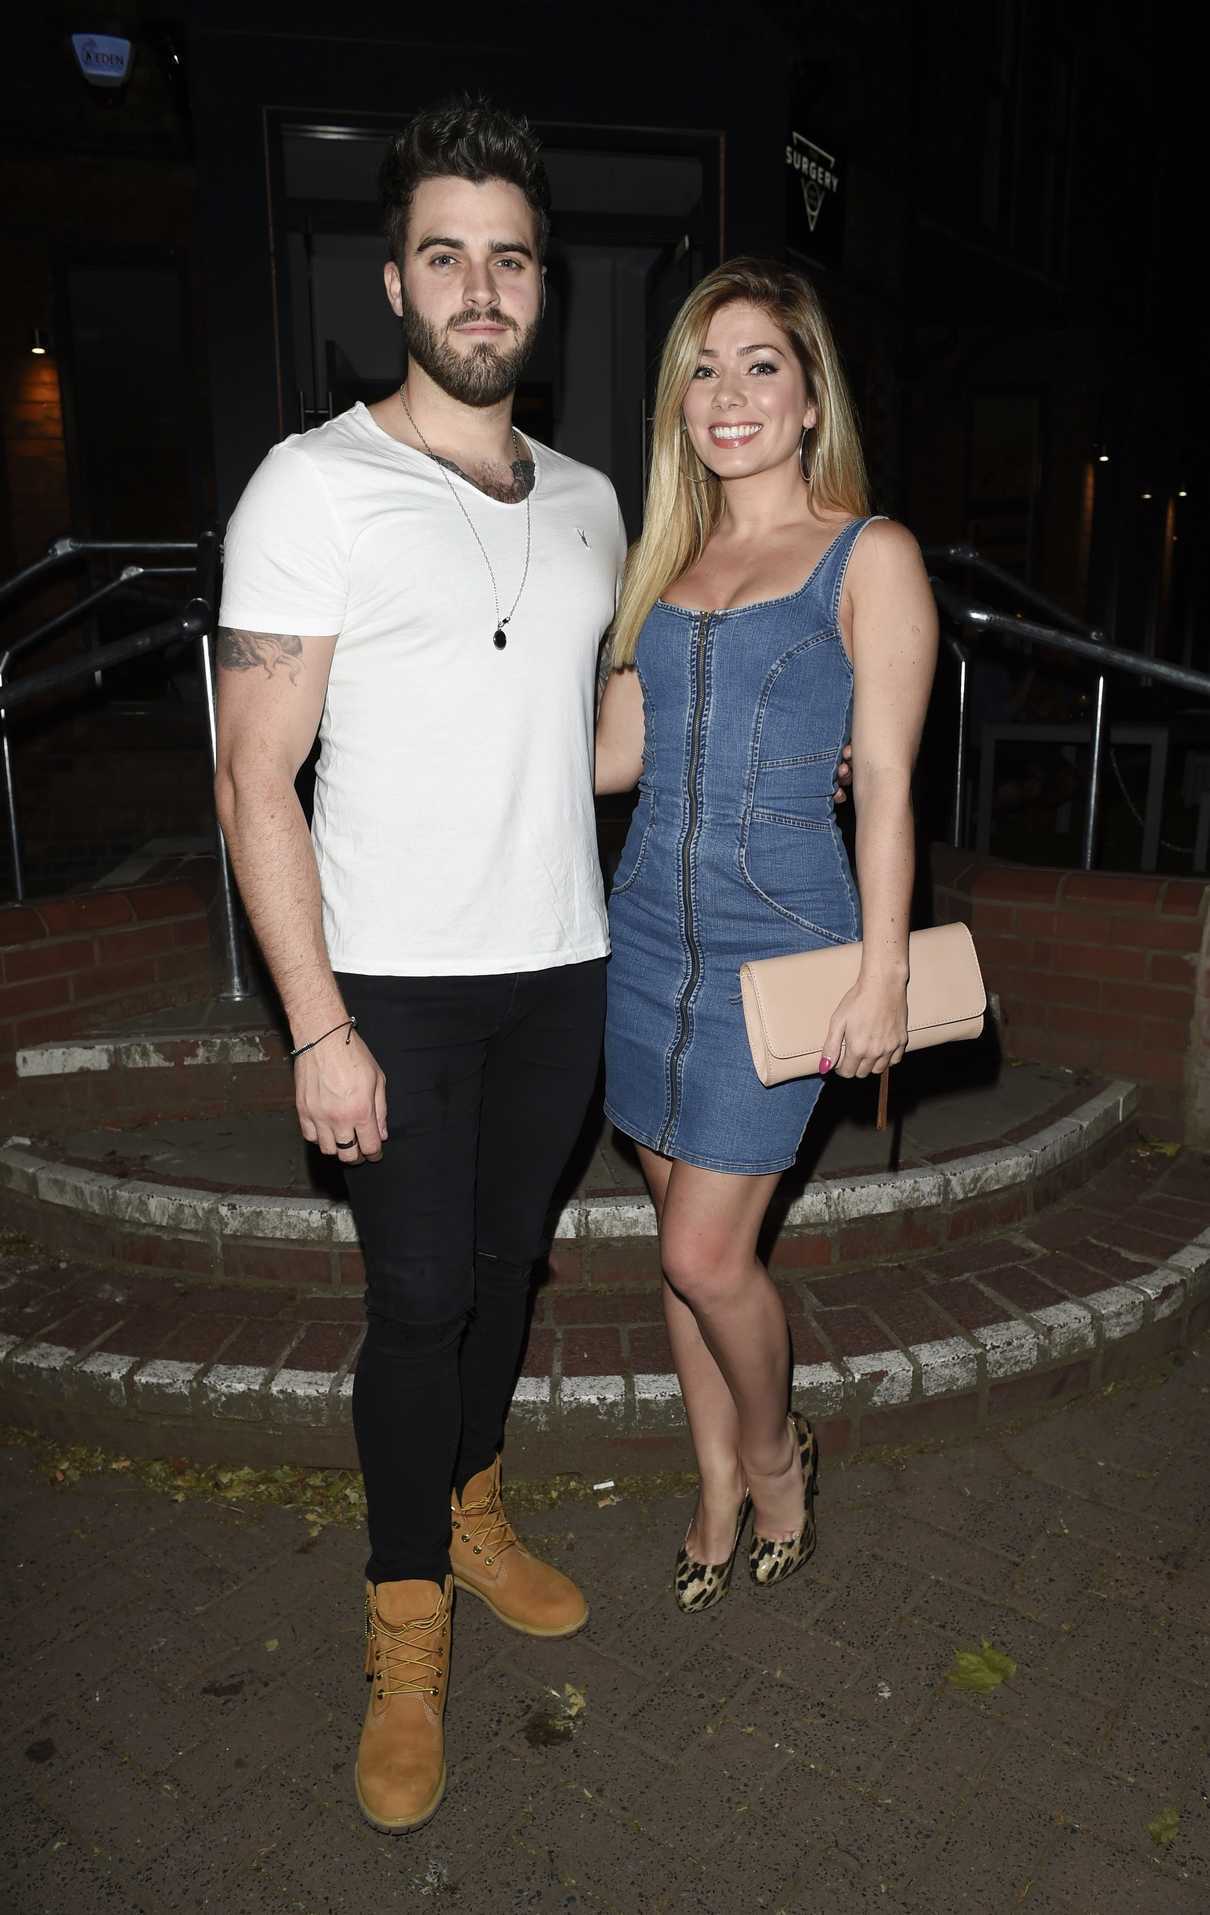 Nikki Sanderson Arrives at the Surgerry Bar and Restaurant in Manchester 05/26/2017-2